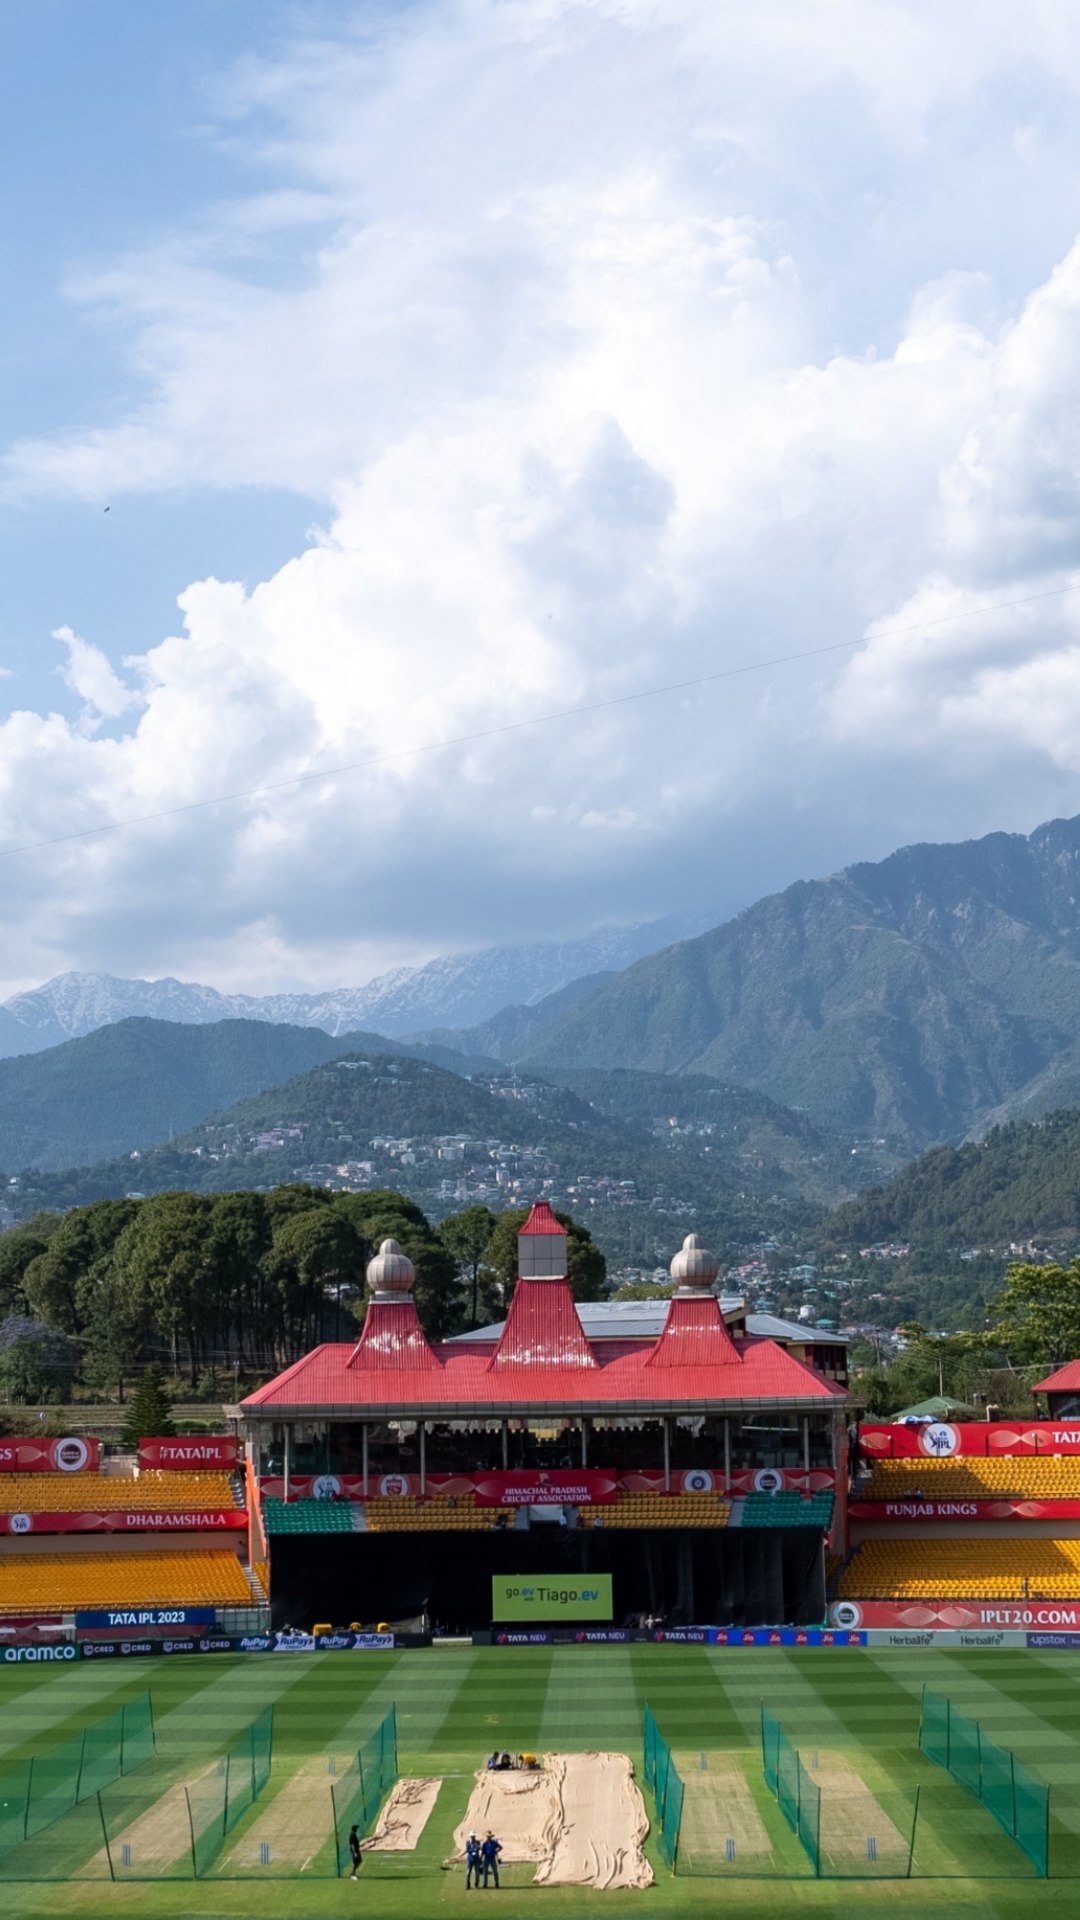 Dharamshala Pictures - Latest Dharamshala Travel Photos, HD Travel Images